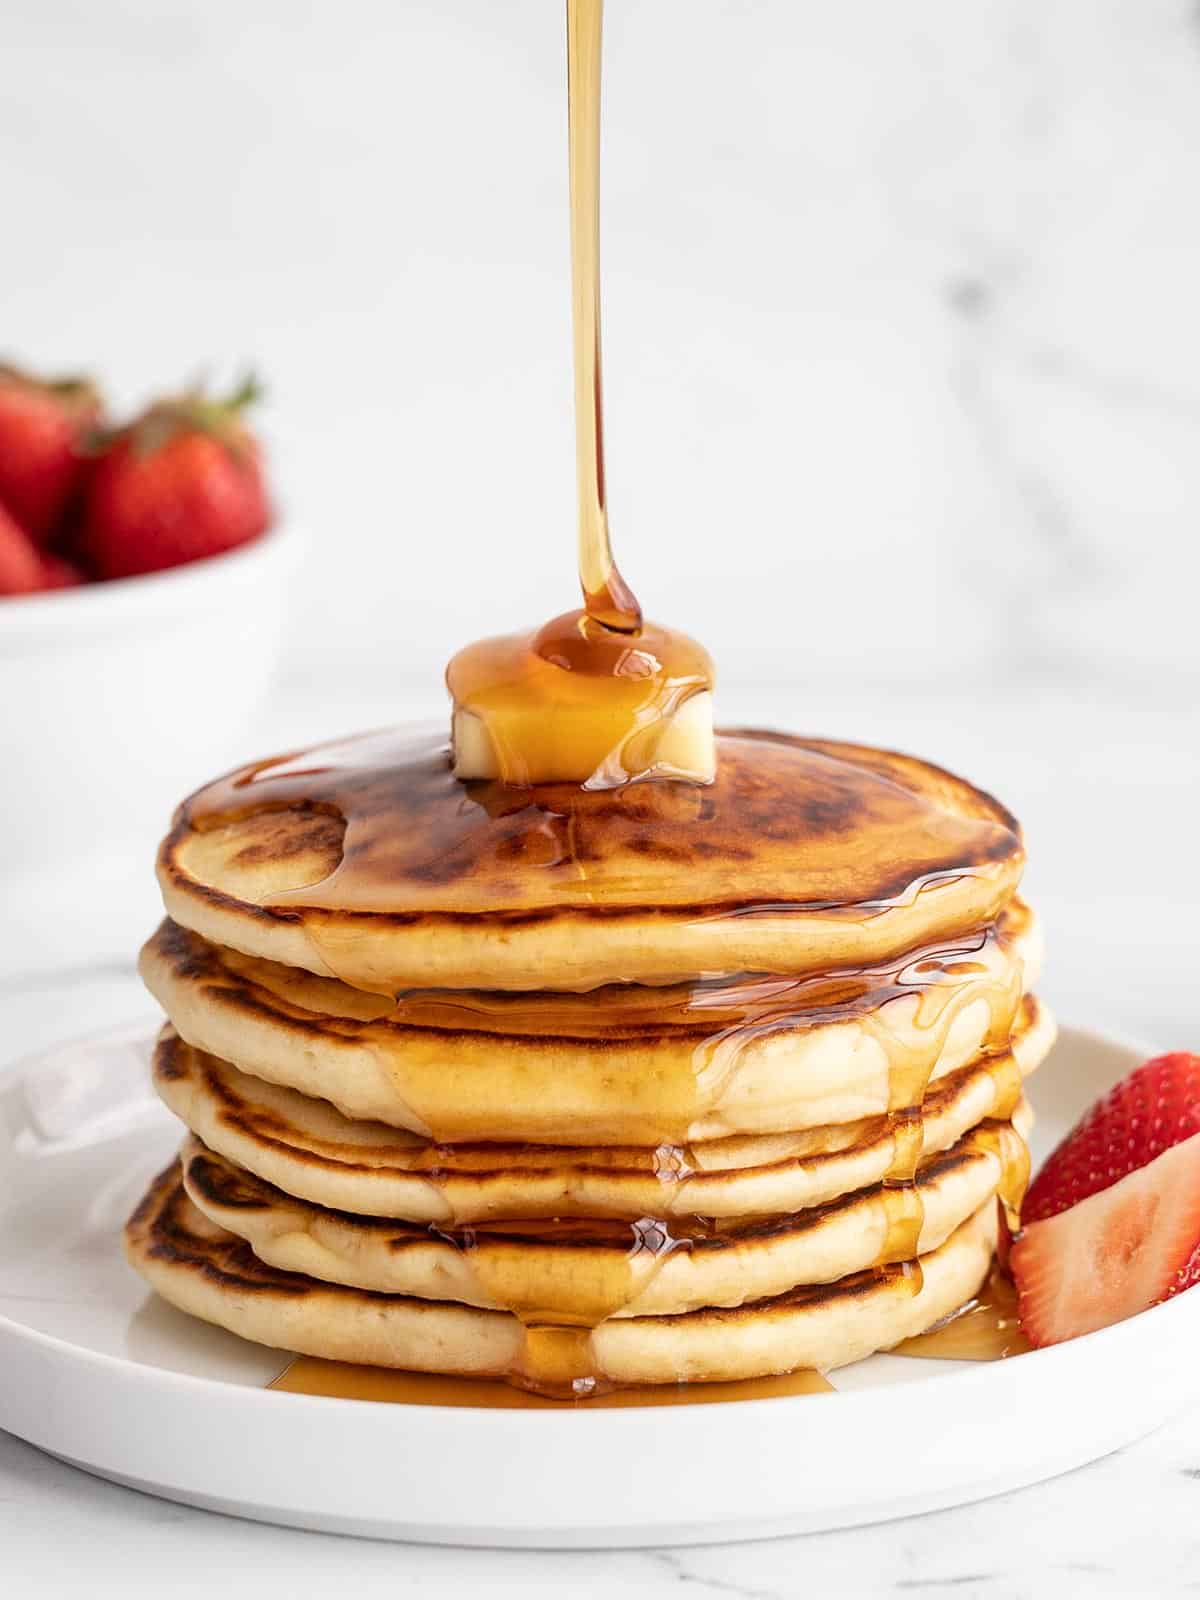 Syrup being poured onto a stack of pancakes.